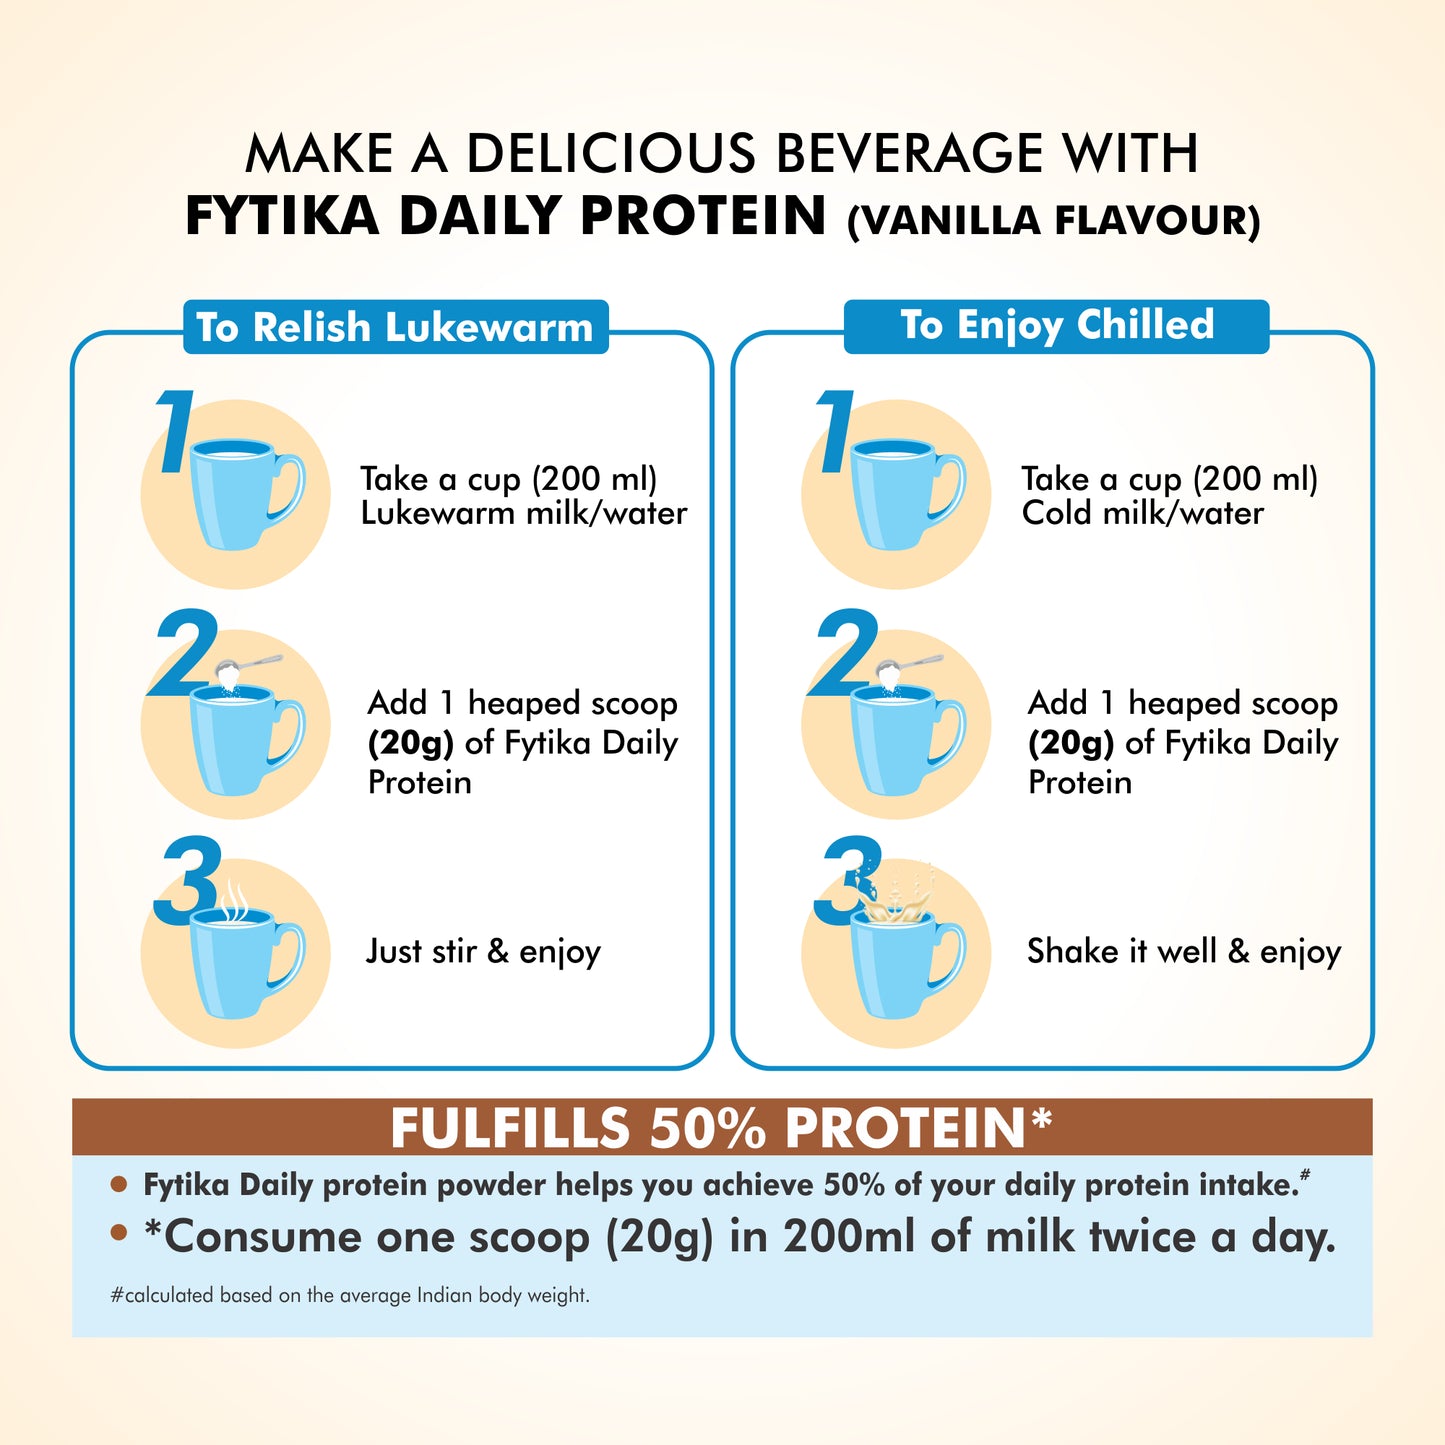 Fytika Complete Nutrition Combo - Daily Protein Powder Vanilla Flavour - 400 G and Vita 365 - 60 Tablets